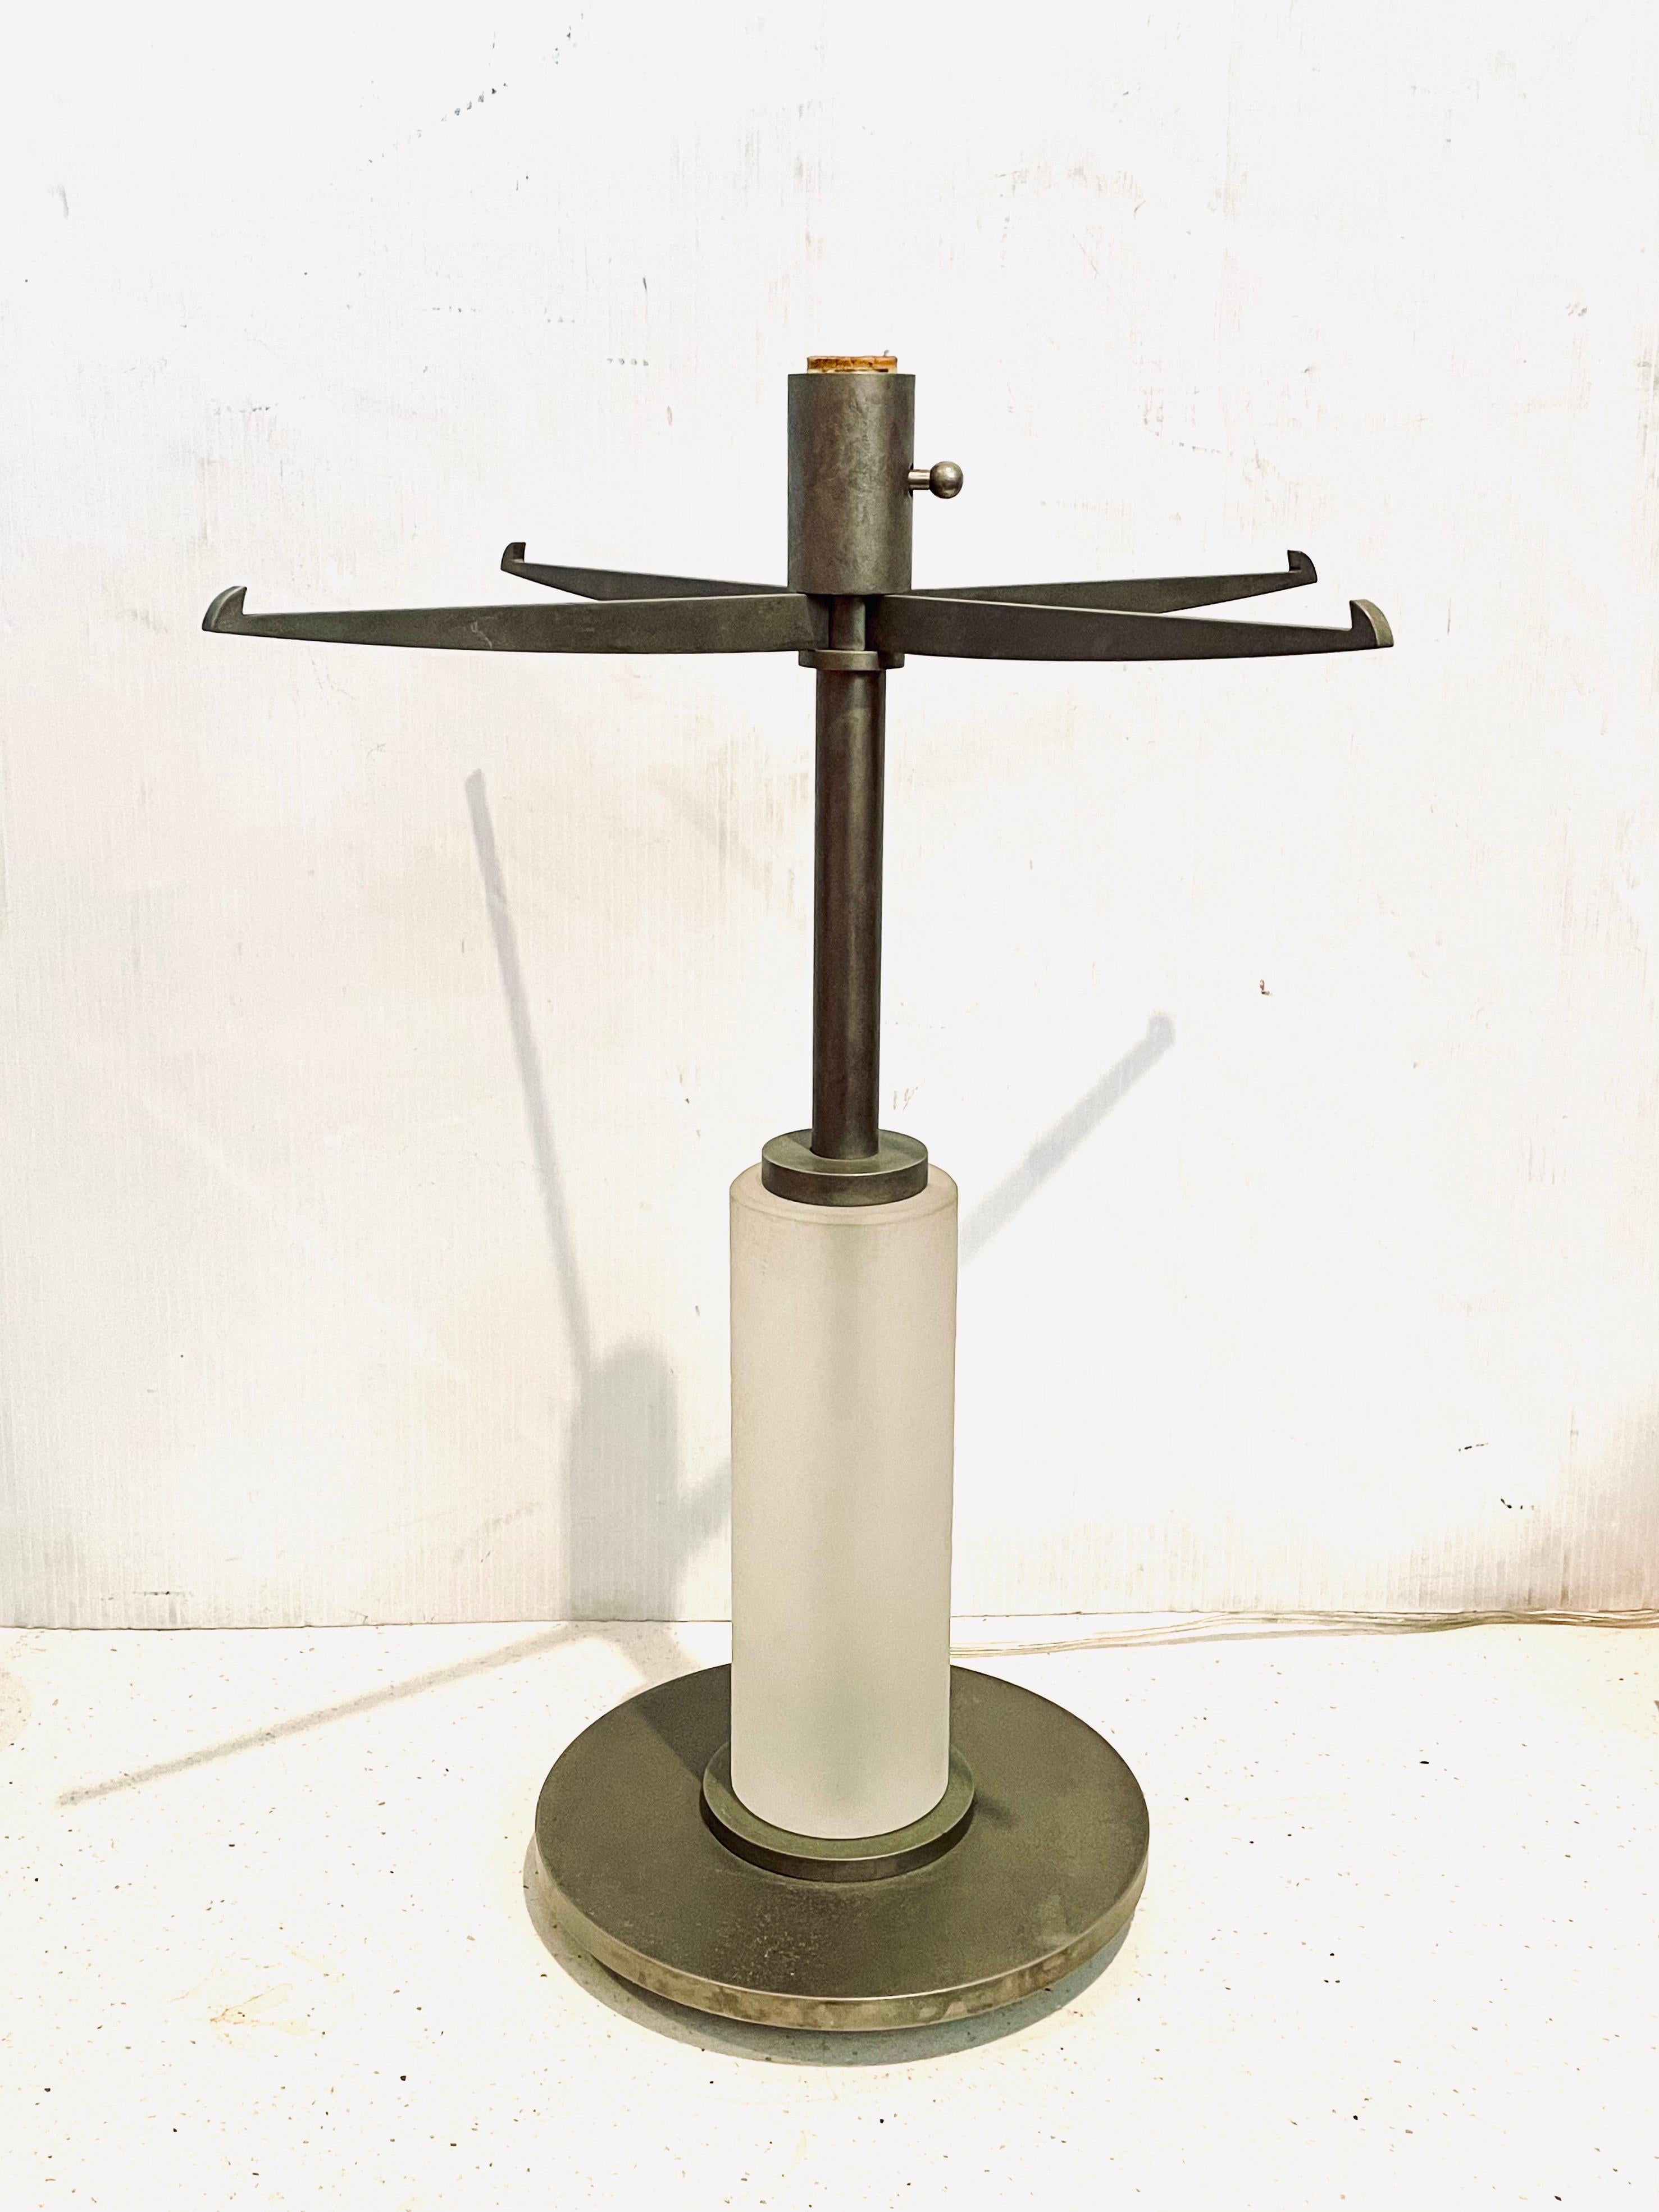 A beautiful & rare table desk lamp, solid steel with a galvanized finish, with solid thick glass center decoration and dimmer switch, the shade its original to the lamp some wear due to age the lamp works great this lamp weighs like 40lbs. the